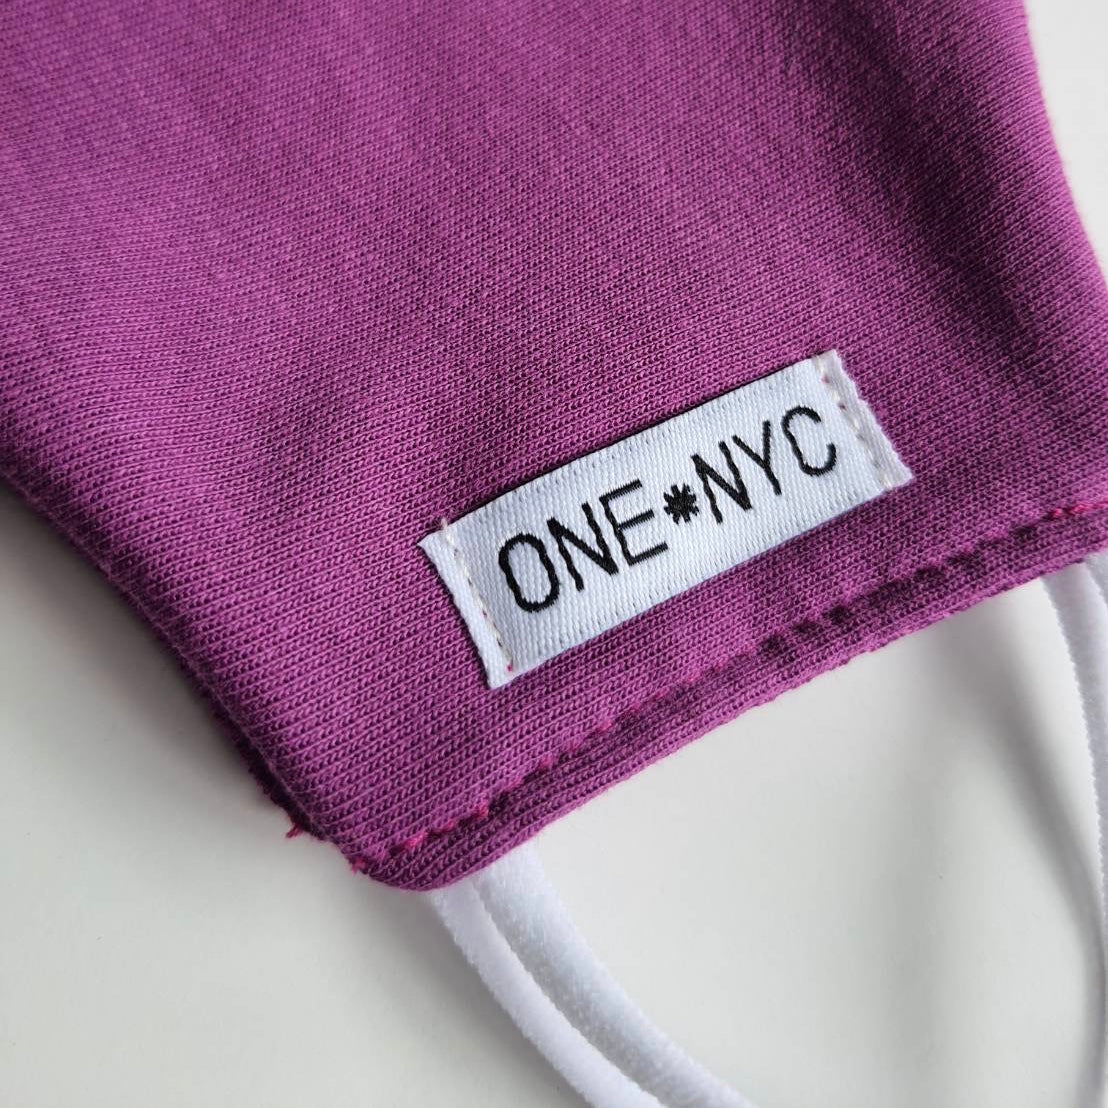 Shop Solid colors. ONE NYC, dry-tech